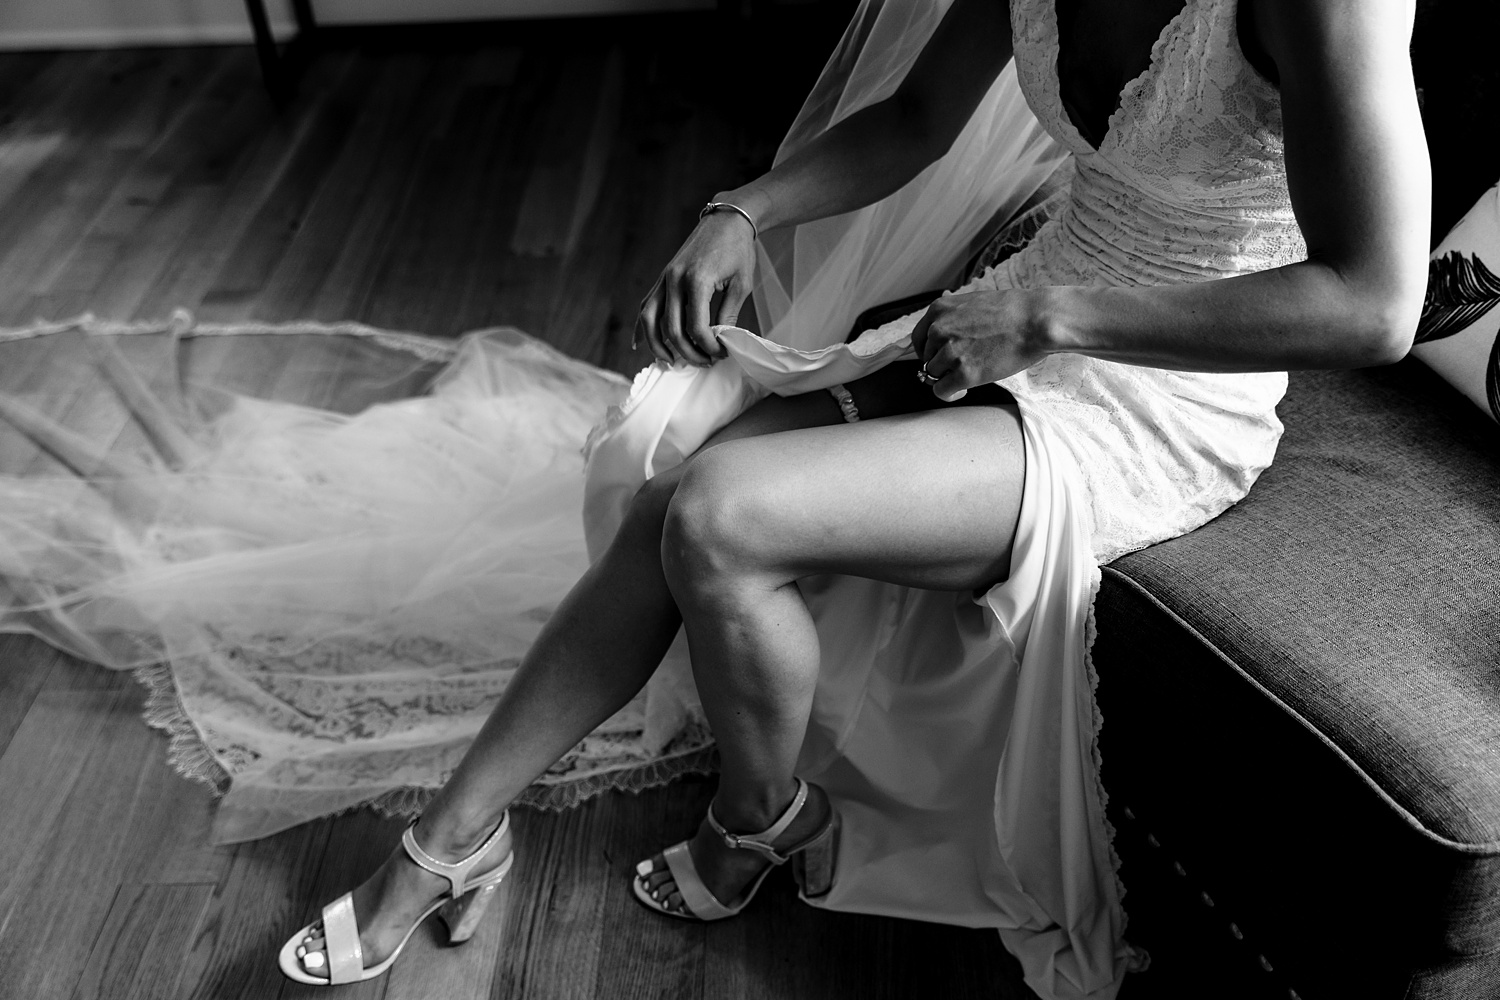 The bride gets ready for her wedding day to begin